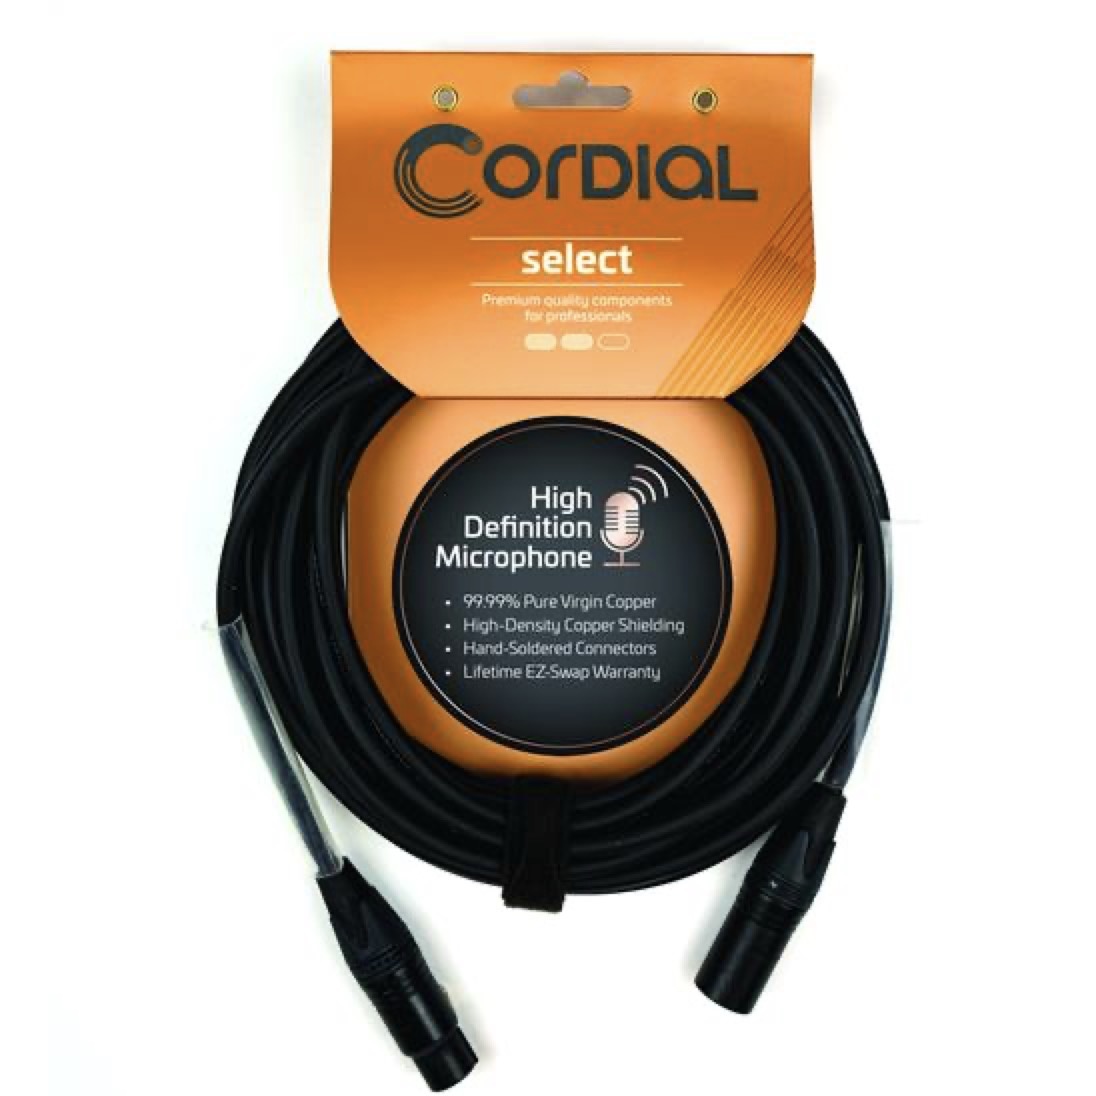 Cordial Cables Premium Microphone Cable with Balanced XLR Connectors, Select Series - 25-Foot Black Cable (7.5 FM)